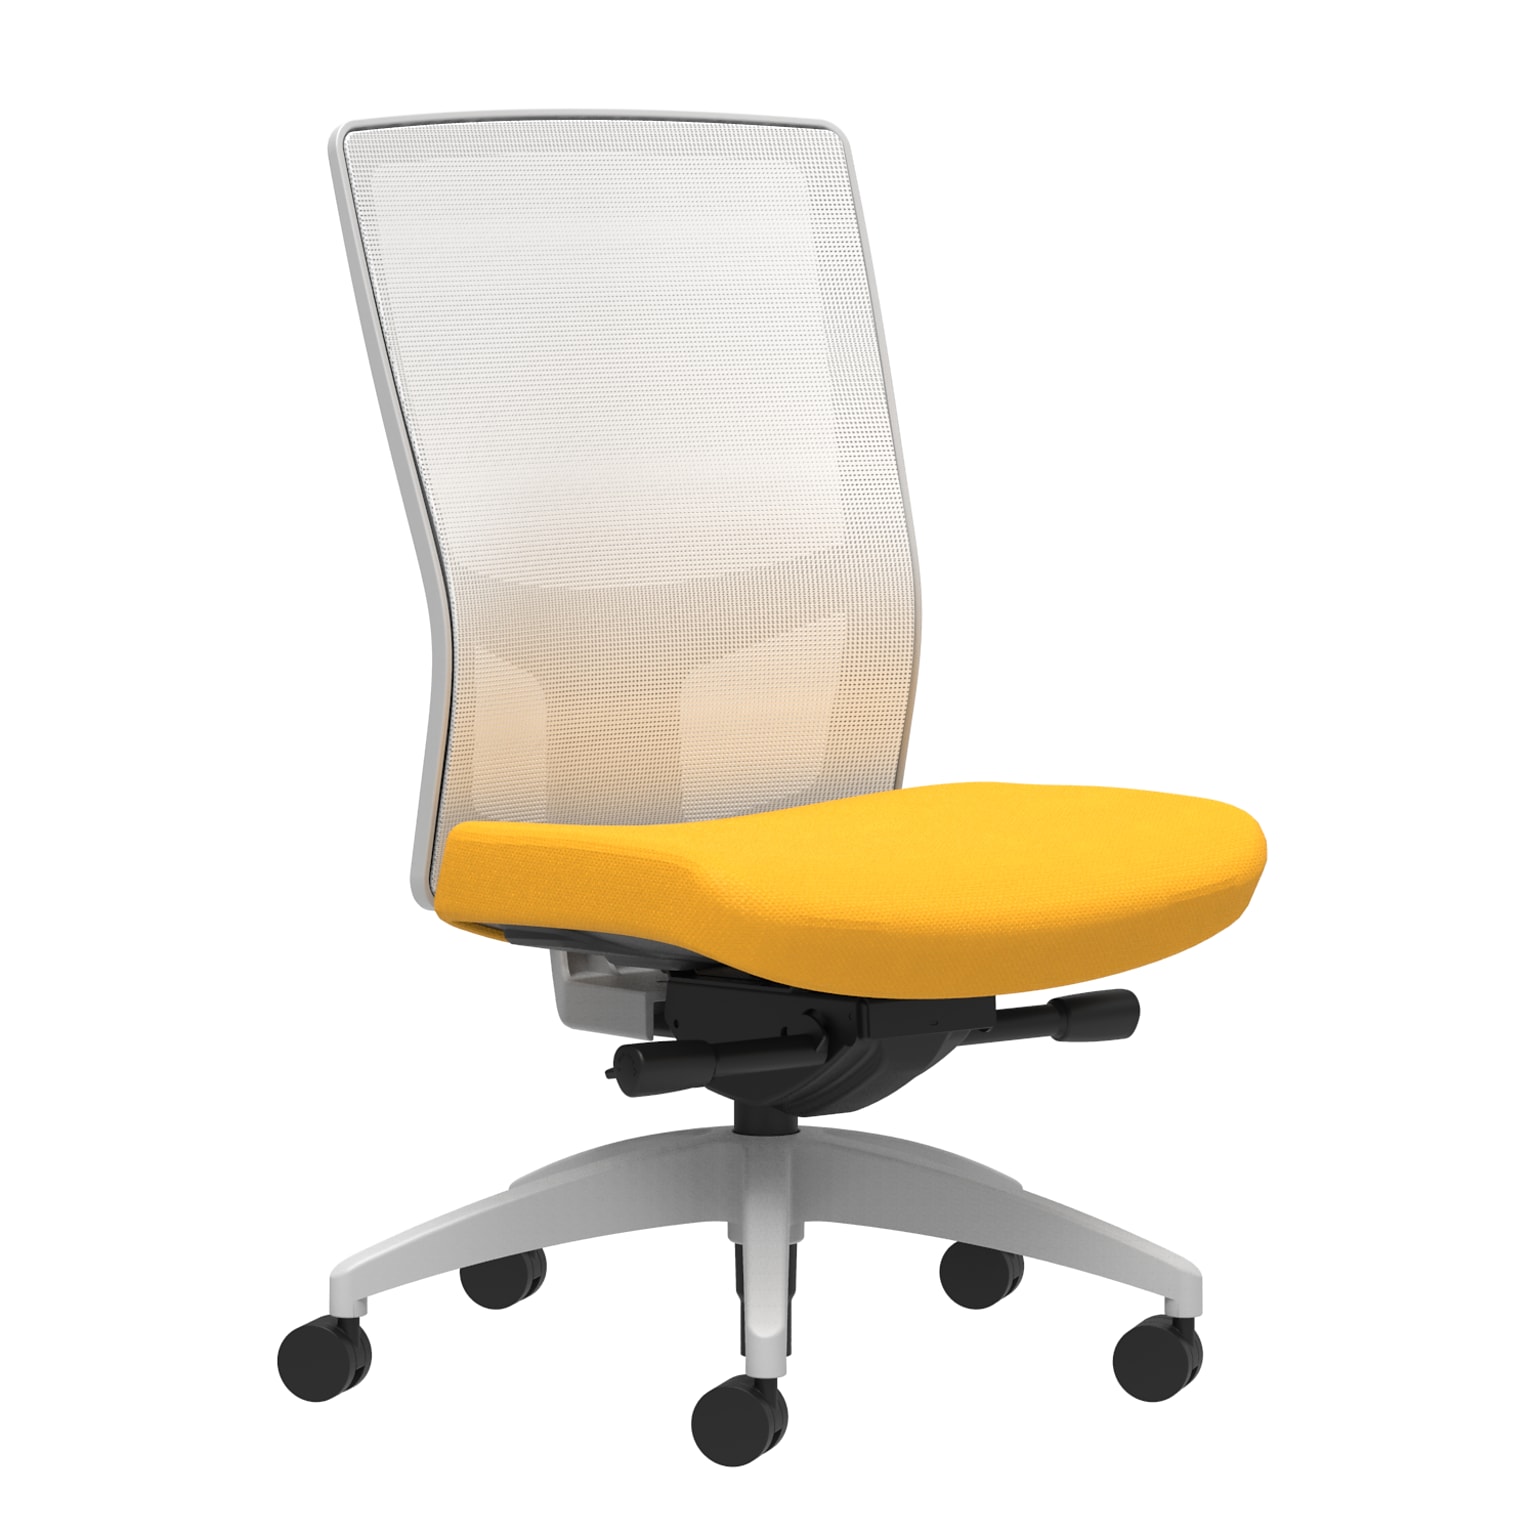 Union & Scale Workplace2.0™ Fabric Task Chair, Goldenrod, Integrated Lumbar, Armless, Advanced Synchro-Tilt Seat Control (53564)